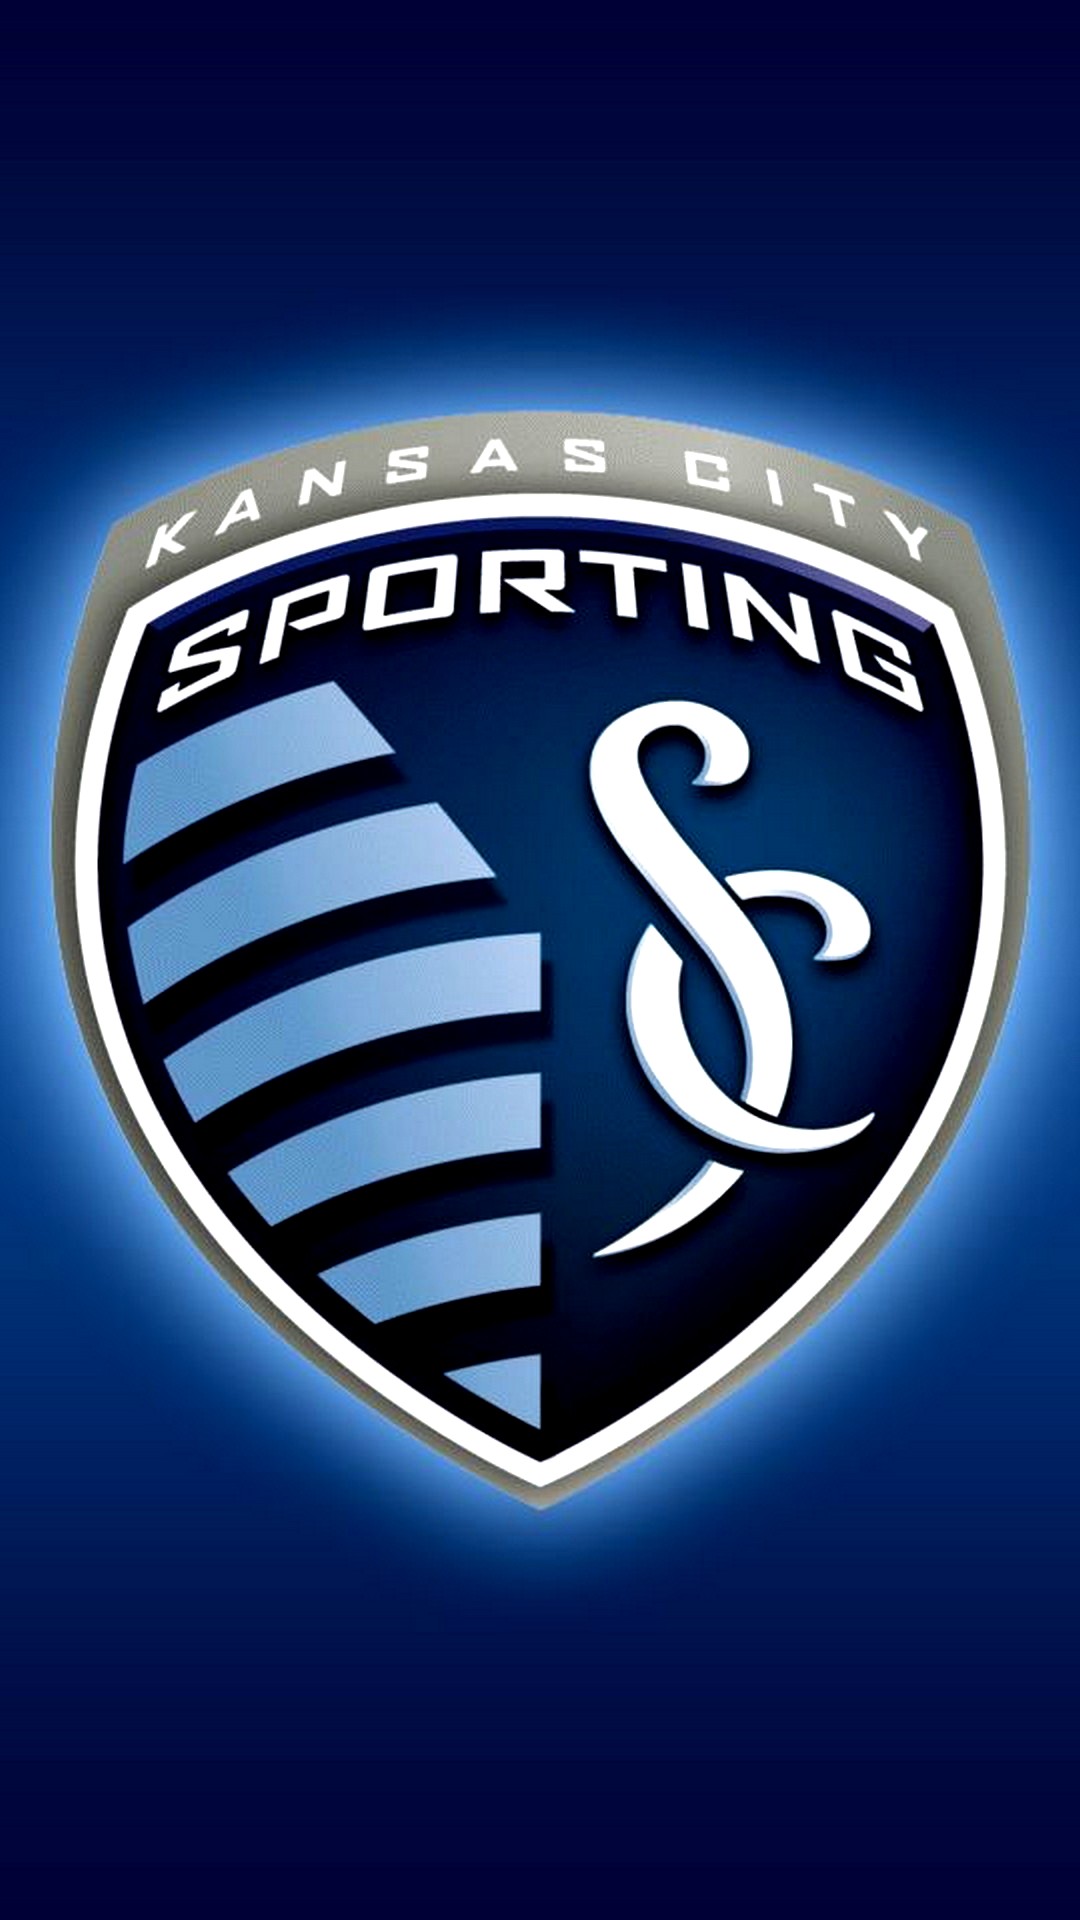 Wallpaper Sporting Kansas City iPhone with high-resolution 1080x1920 pixel. You can use this wallpaper for your Desktop Computers, Mac Screensavers, Windows Backgrounds, iPhone Wallpapers, Tablet or Android Lock screen and another Mobile device